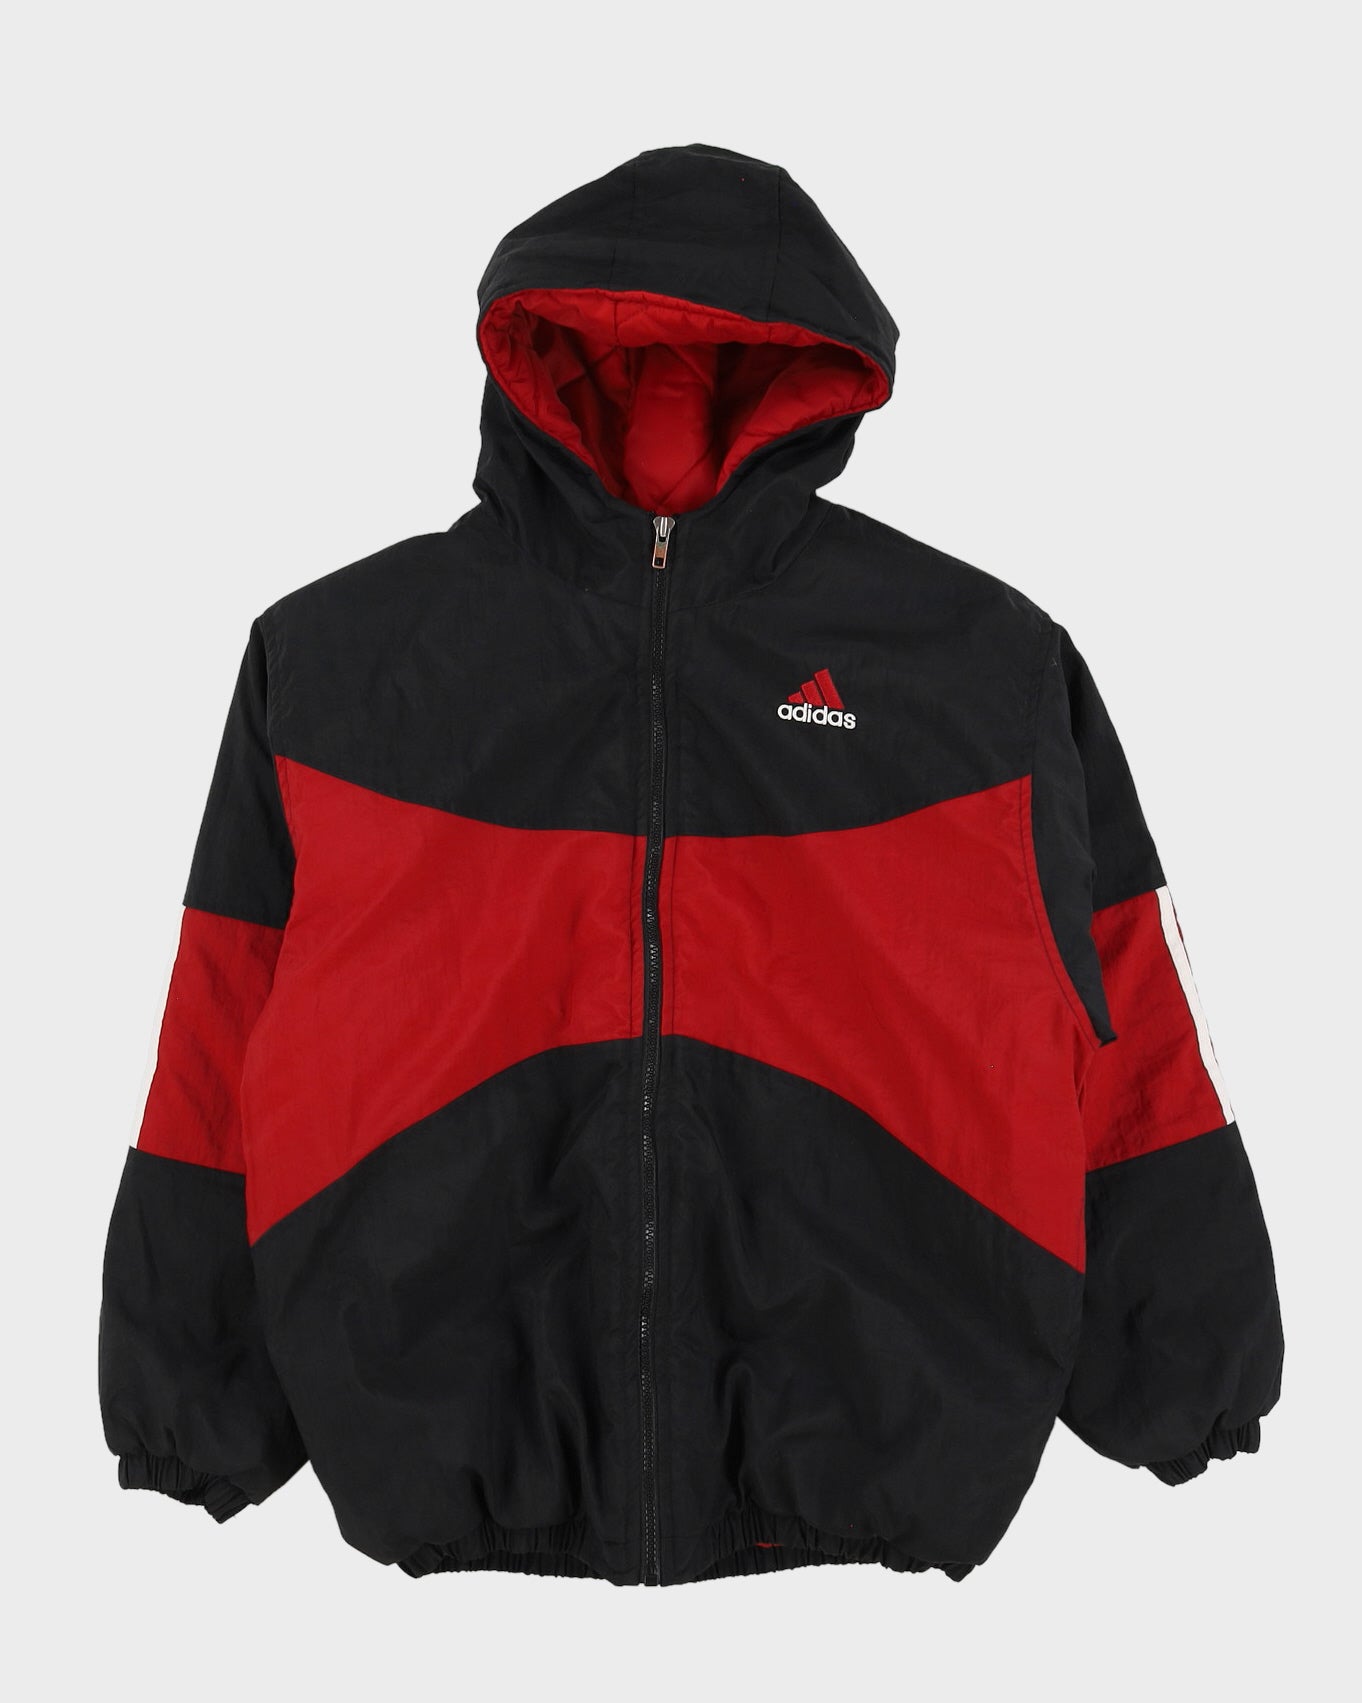 Vintage 90s Adidas Black / Red Hooded Jacket With Embroidery On The Back - L